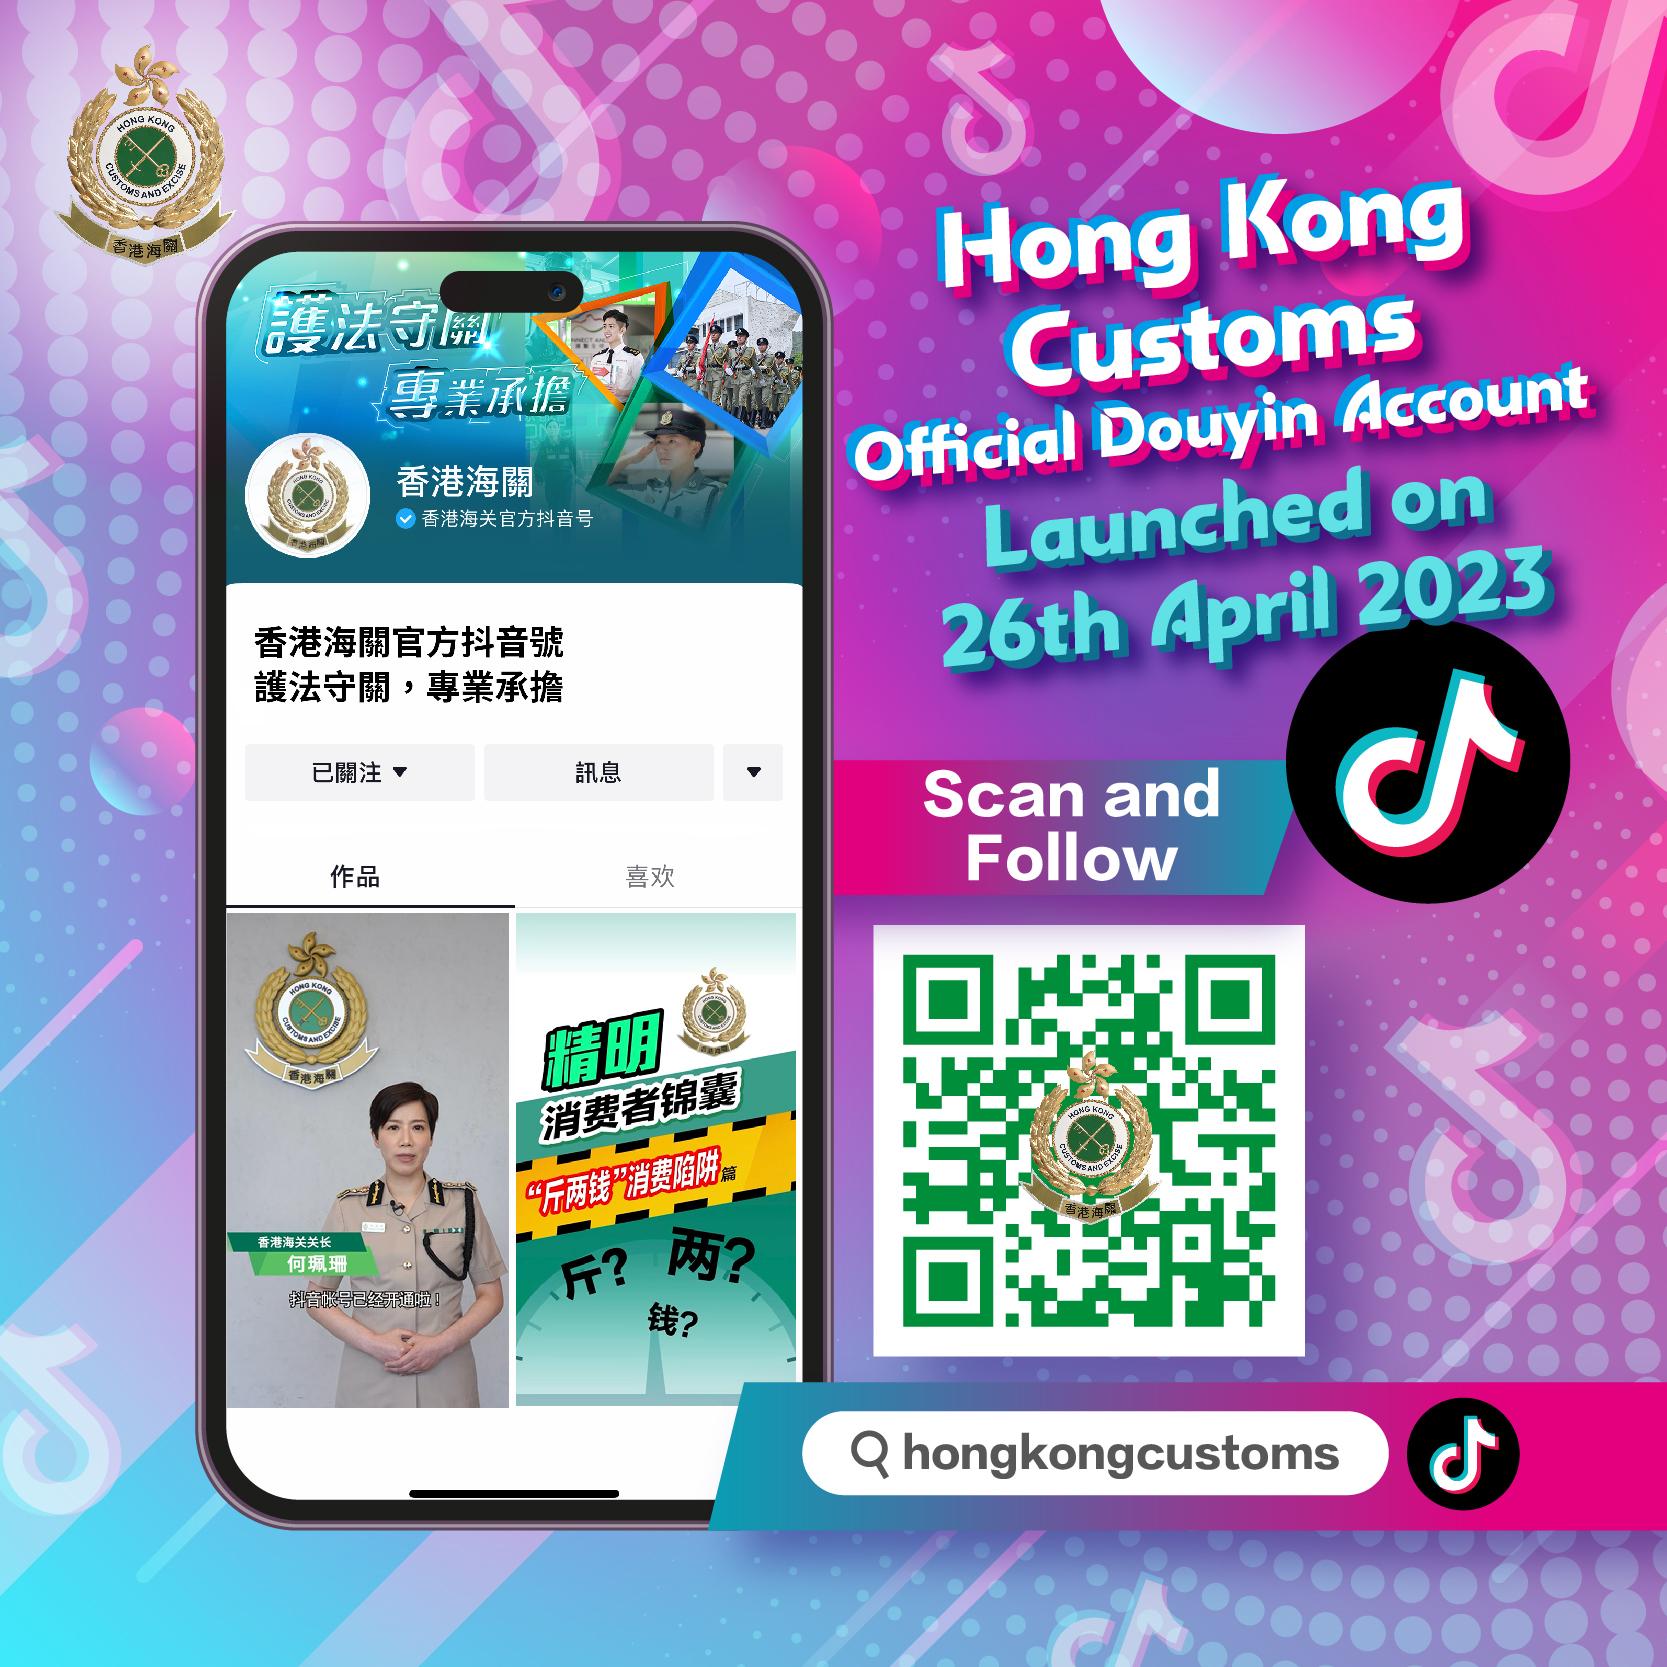 Hong Kong Customs launched its official Douyin account today (April 26). A promotional video featuring the Commissioner of Customs and Excise, Ms Louise Ho, has been produced specifically as a prelude to the launch. Photo shows a screenshot of the video.
